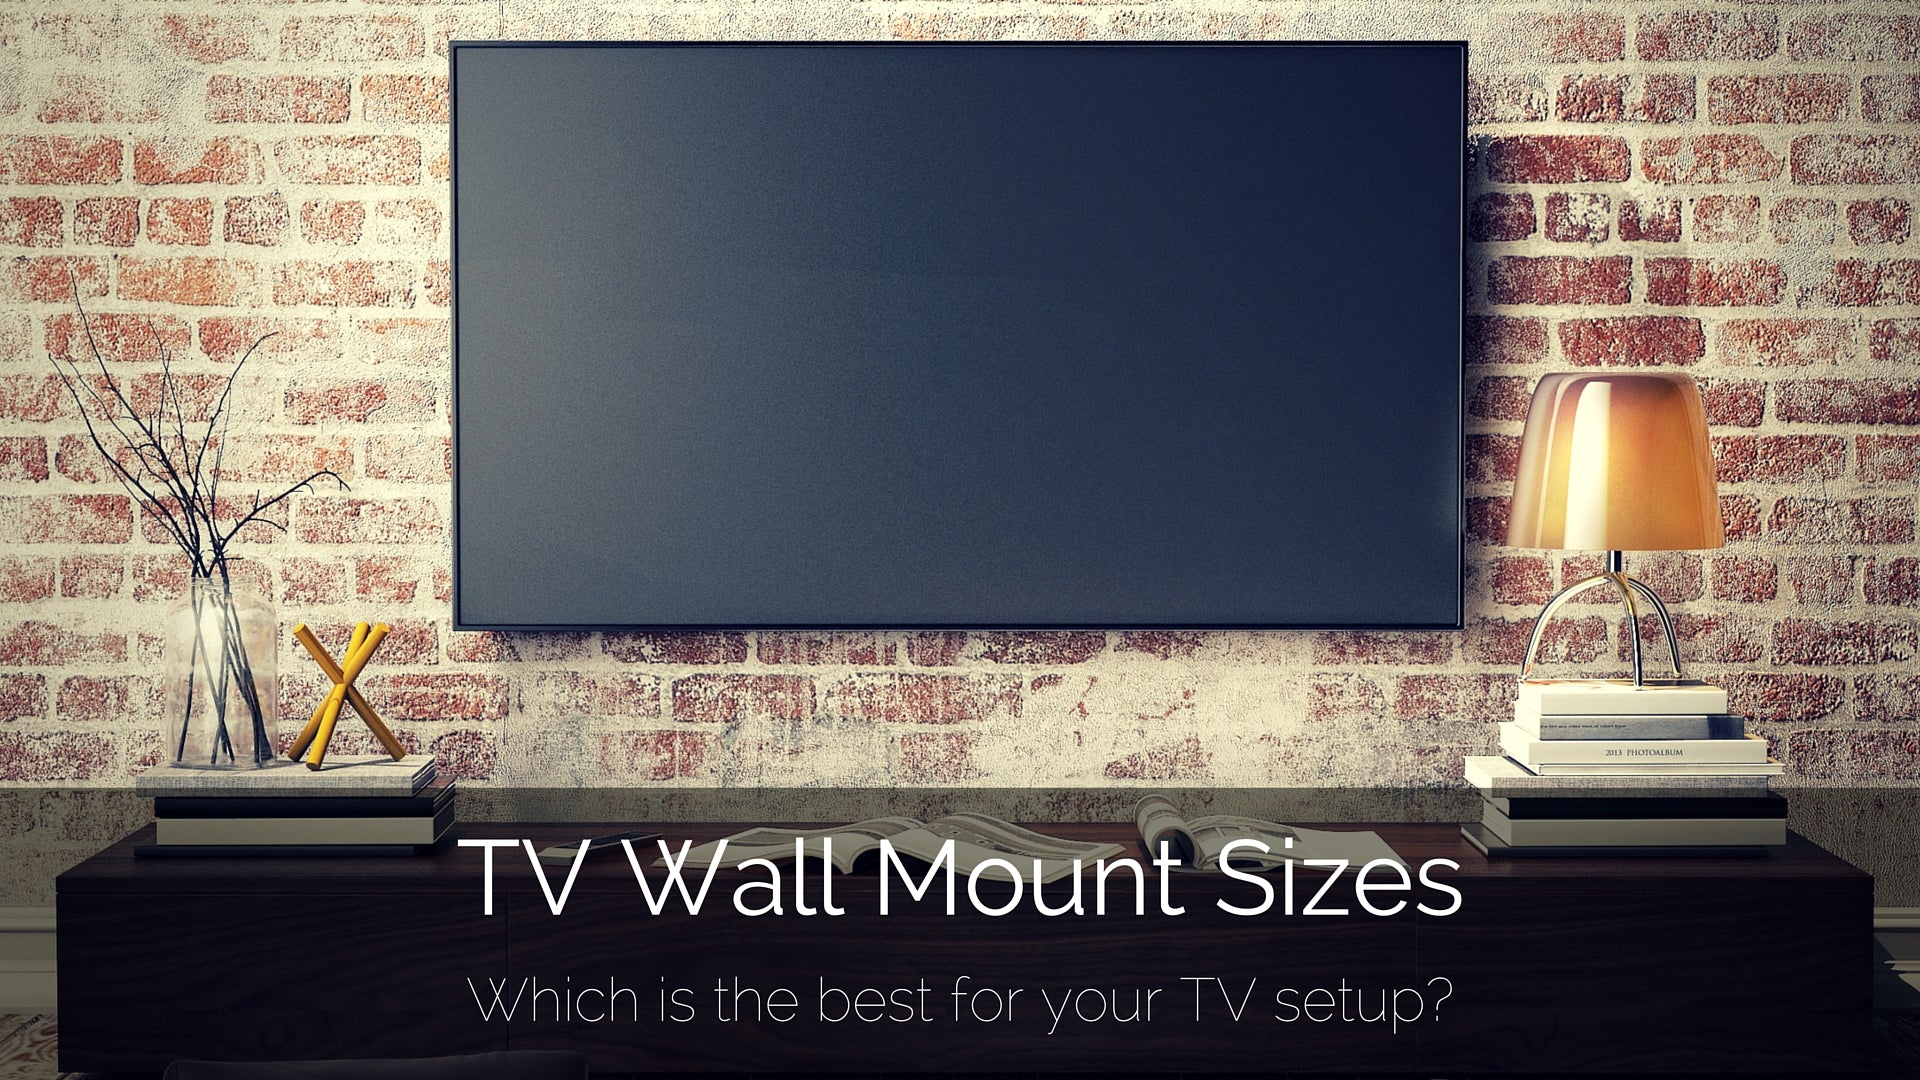 https://cdn.shopify.com/s/files/1/0020/4433/0057/files/TV-Wall-Mount-Sizes-Which-Is-Best-For-Your-TV.jpg